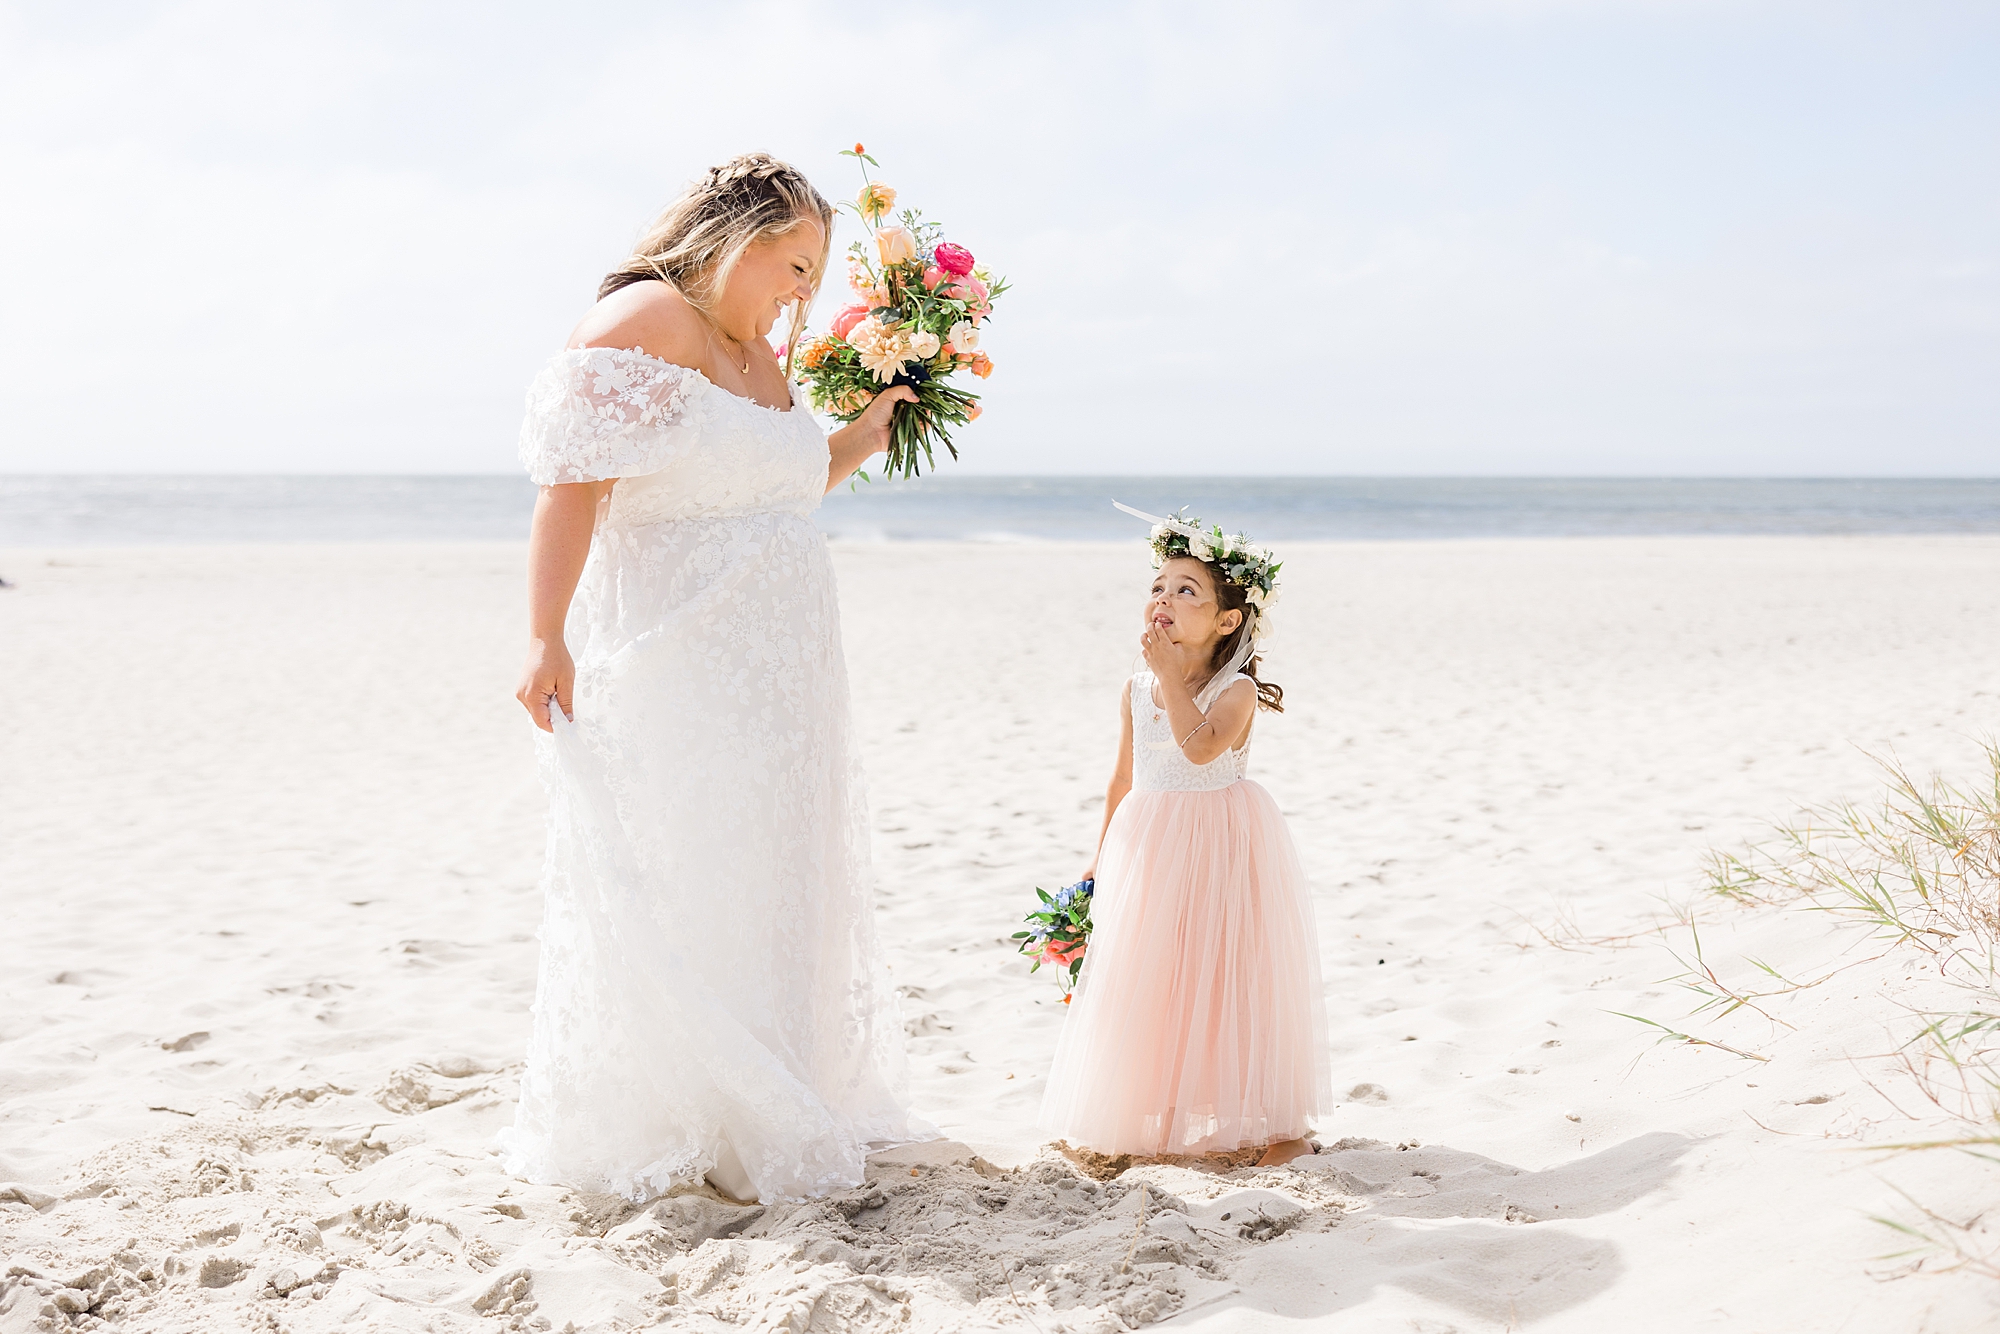 mother-daughter on the beach after wedding